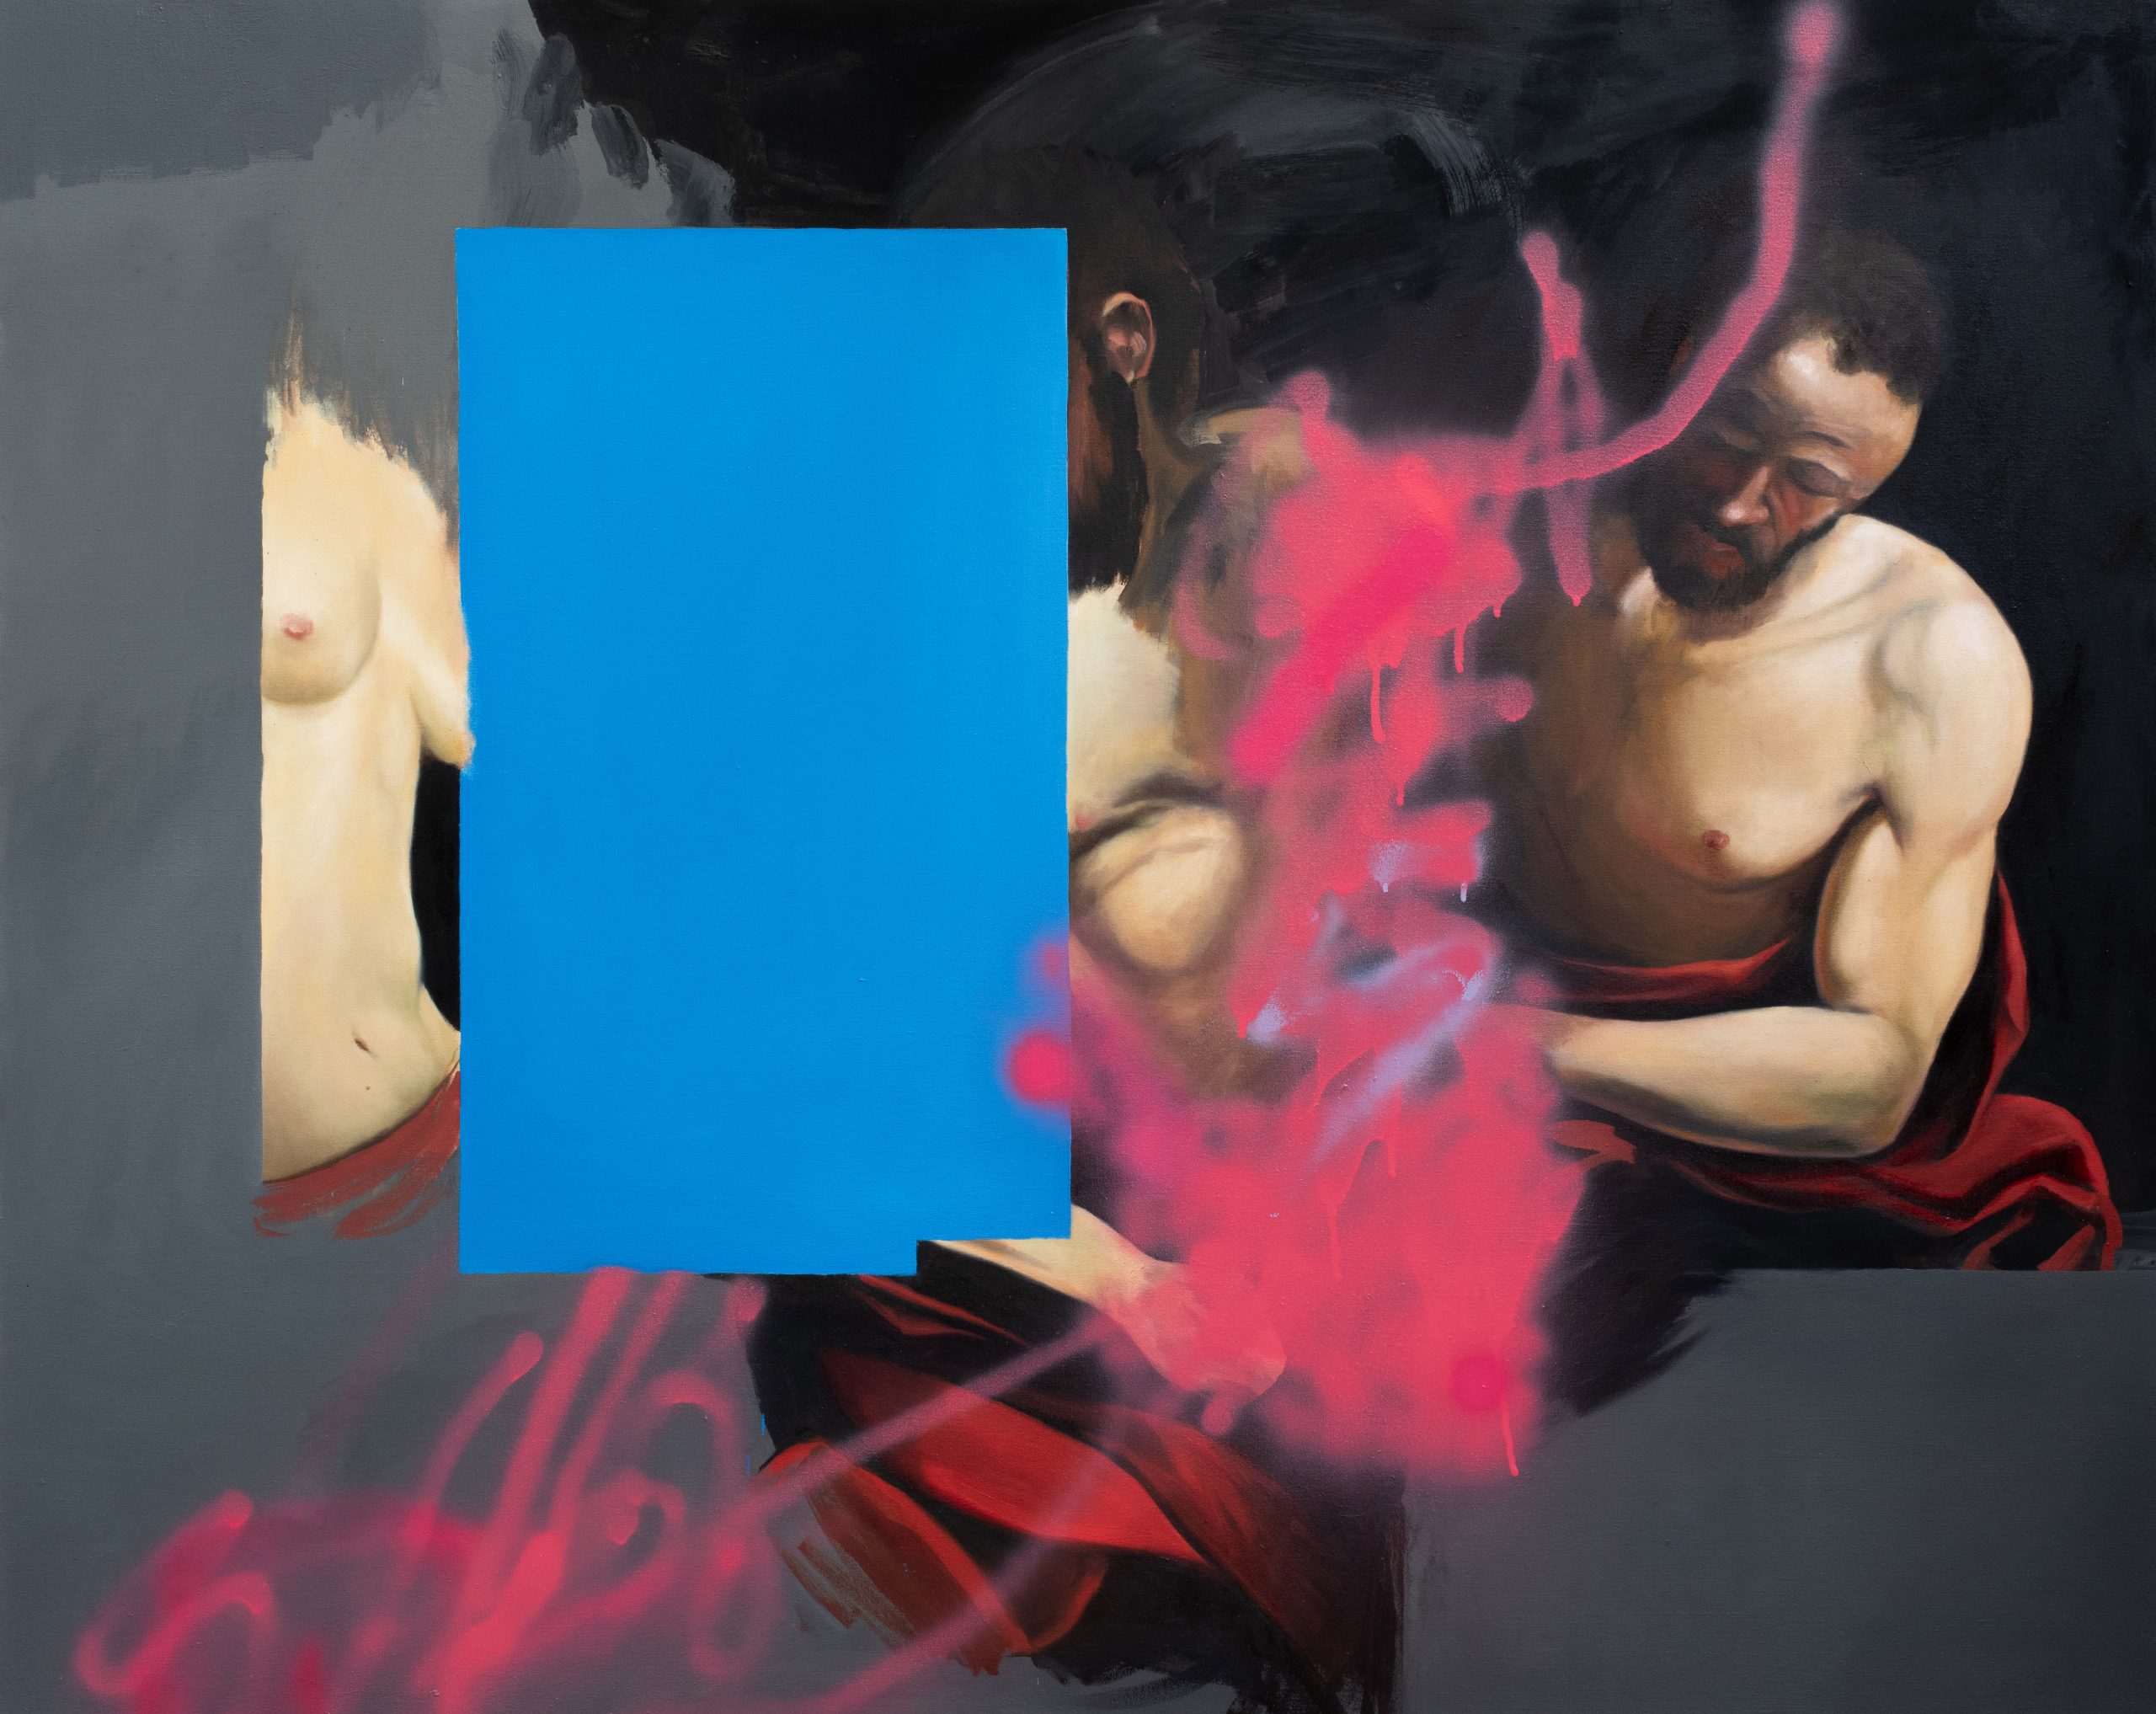 a painting of two men and a women, all topless, in the style of Caravaggio with magenta spray paint and a blue rectangle disrupting the surface 